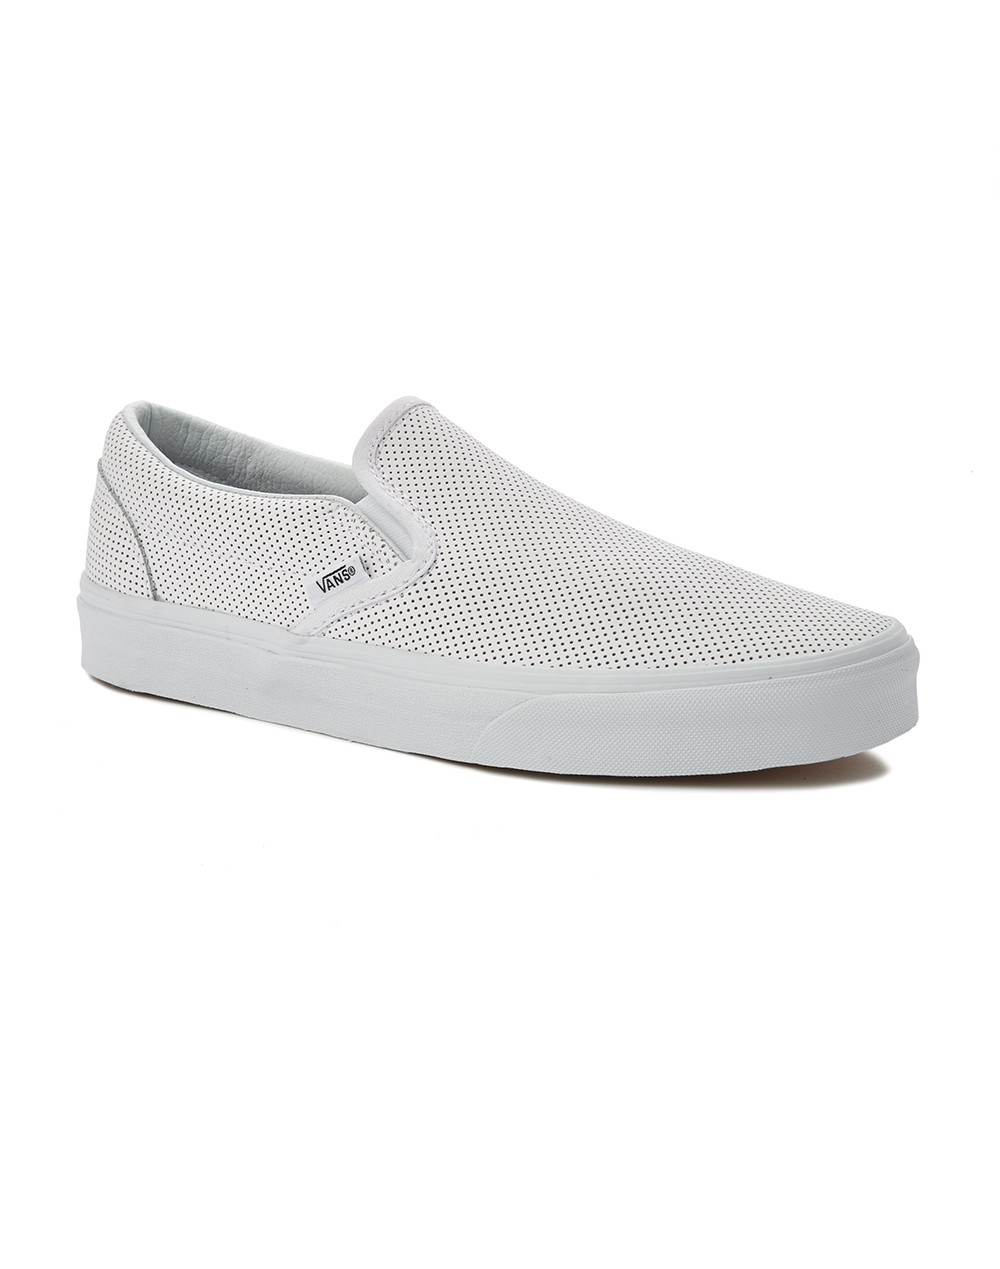 Lyst - Vans Classic Slip-on In Perforated Leather in White for Men